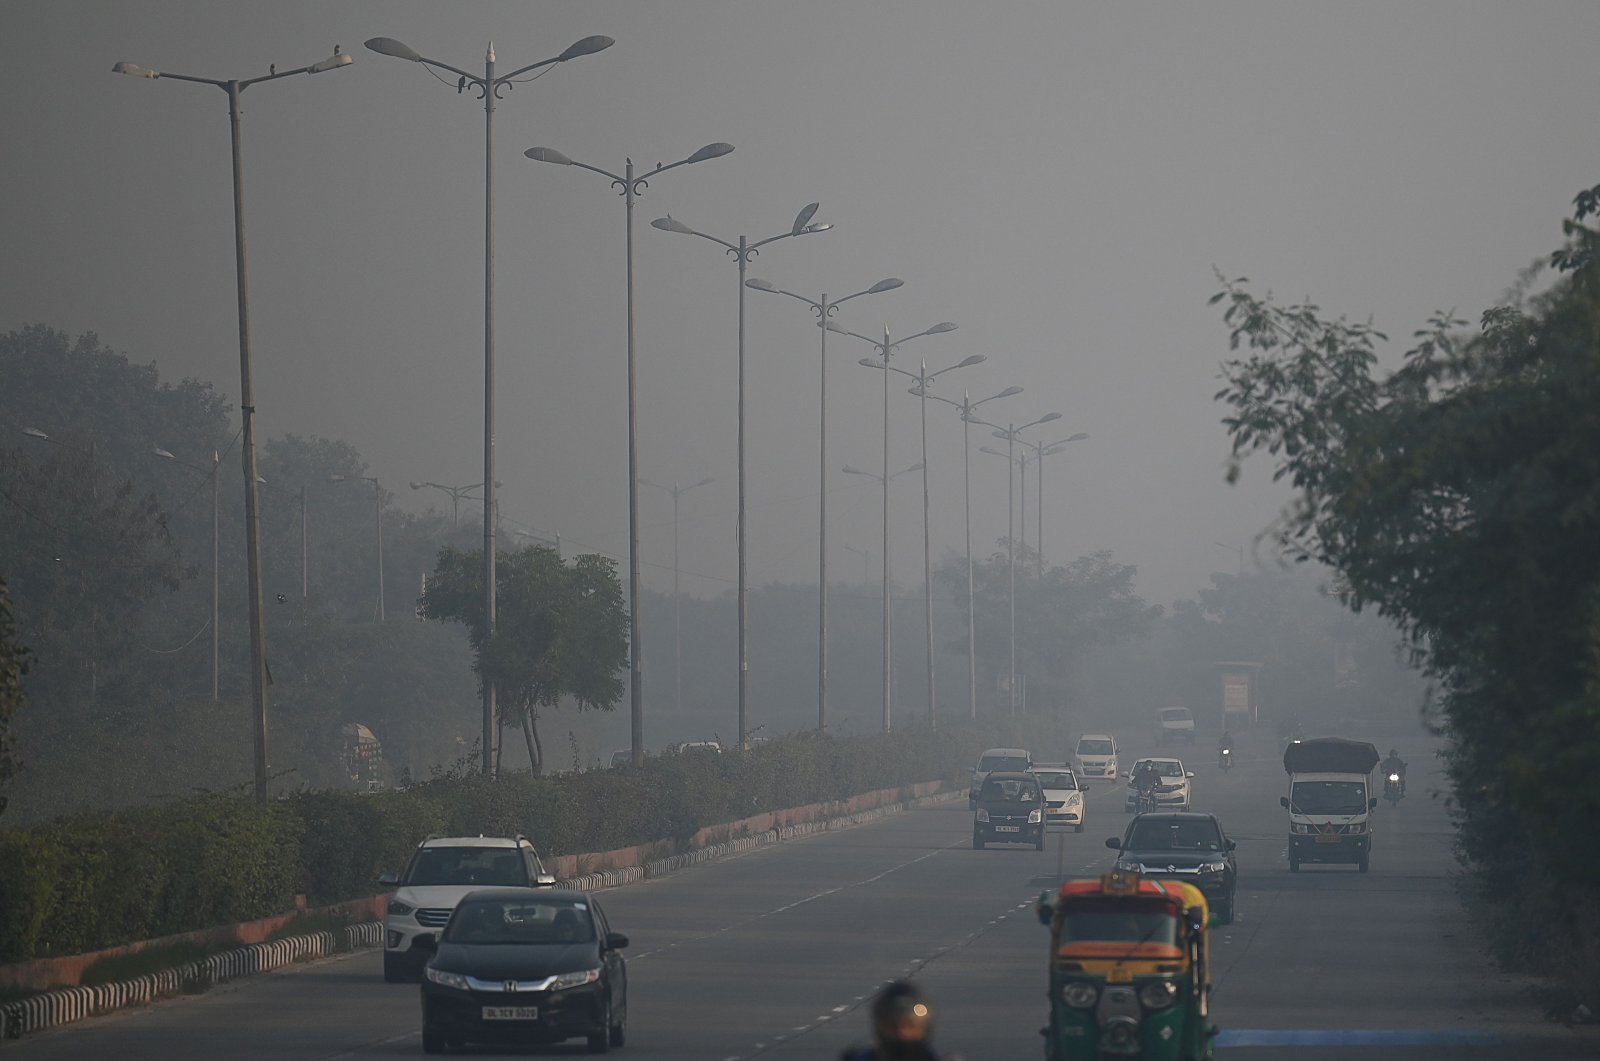 Commuters drive along a road amid heavy smog conditions in New Delhi, India, Nov. 21, 2021. (AFP Photo)